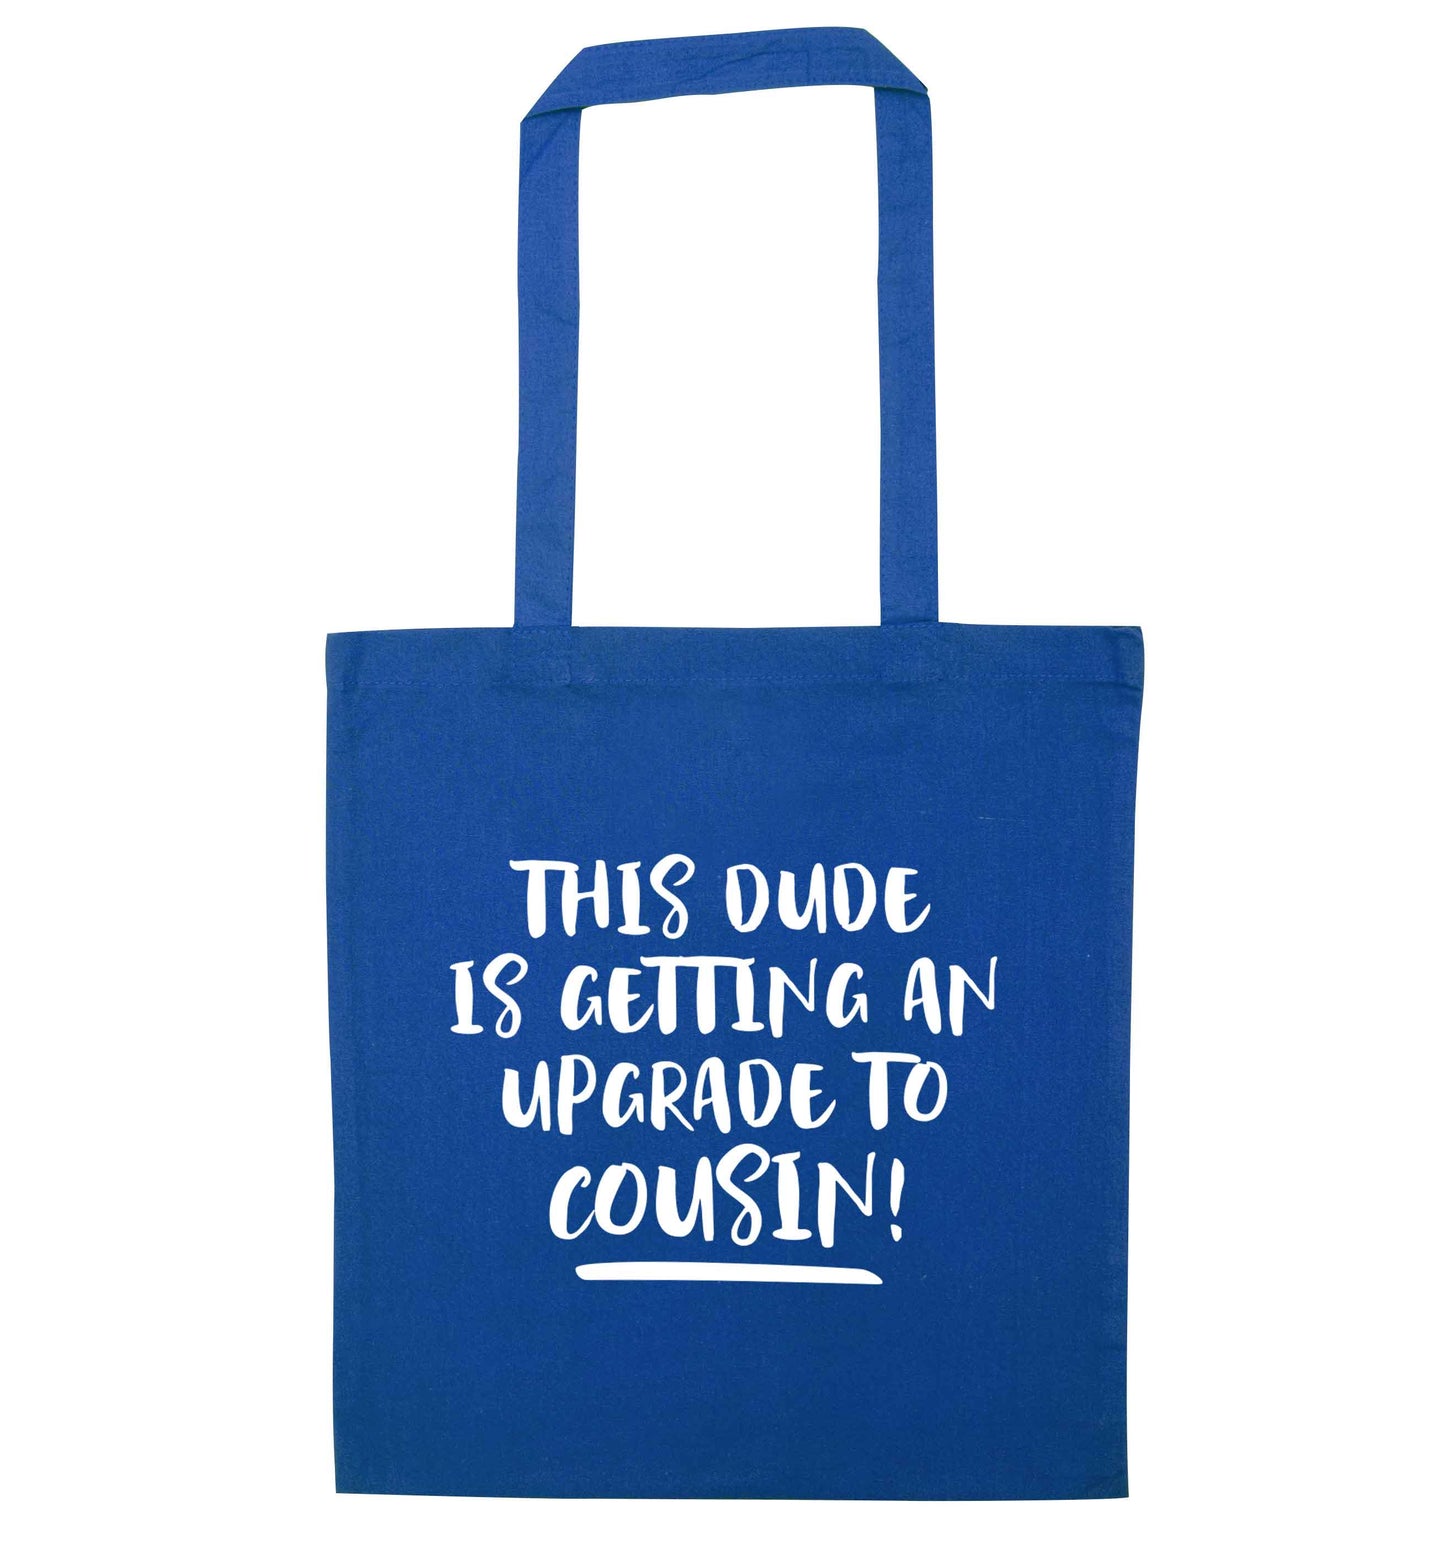 This dude is getting an upgrade to cousin! blue tote bag